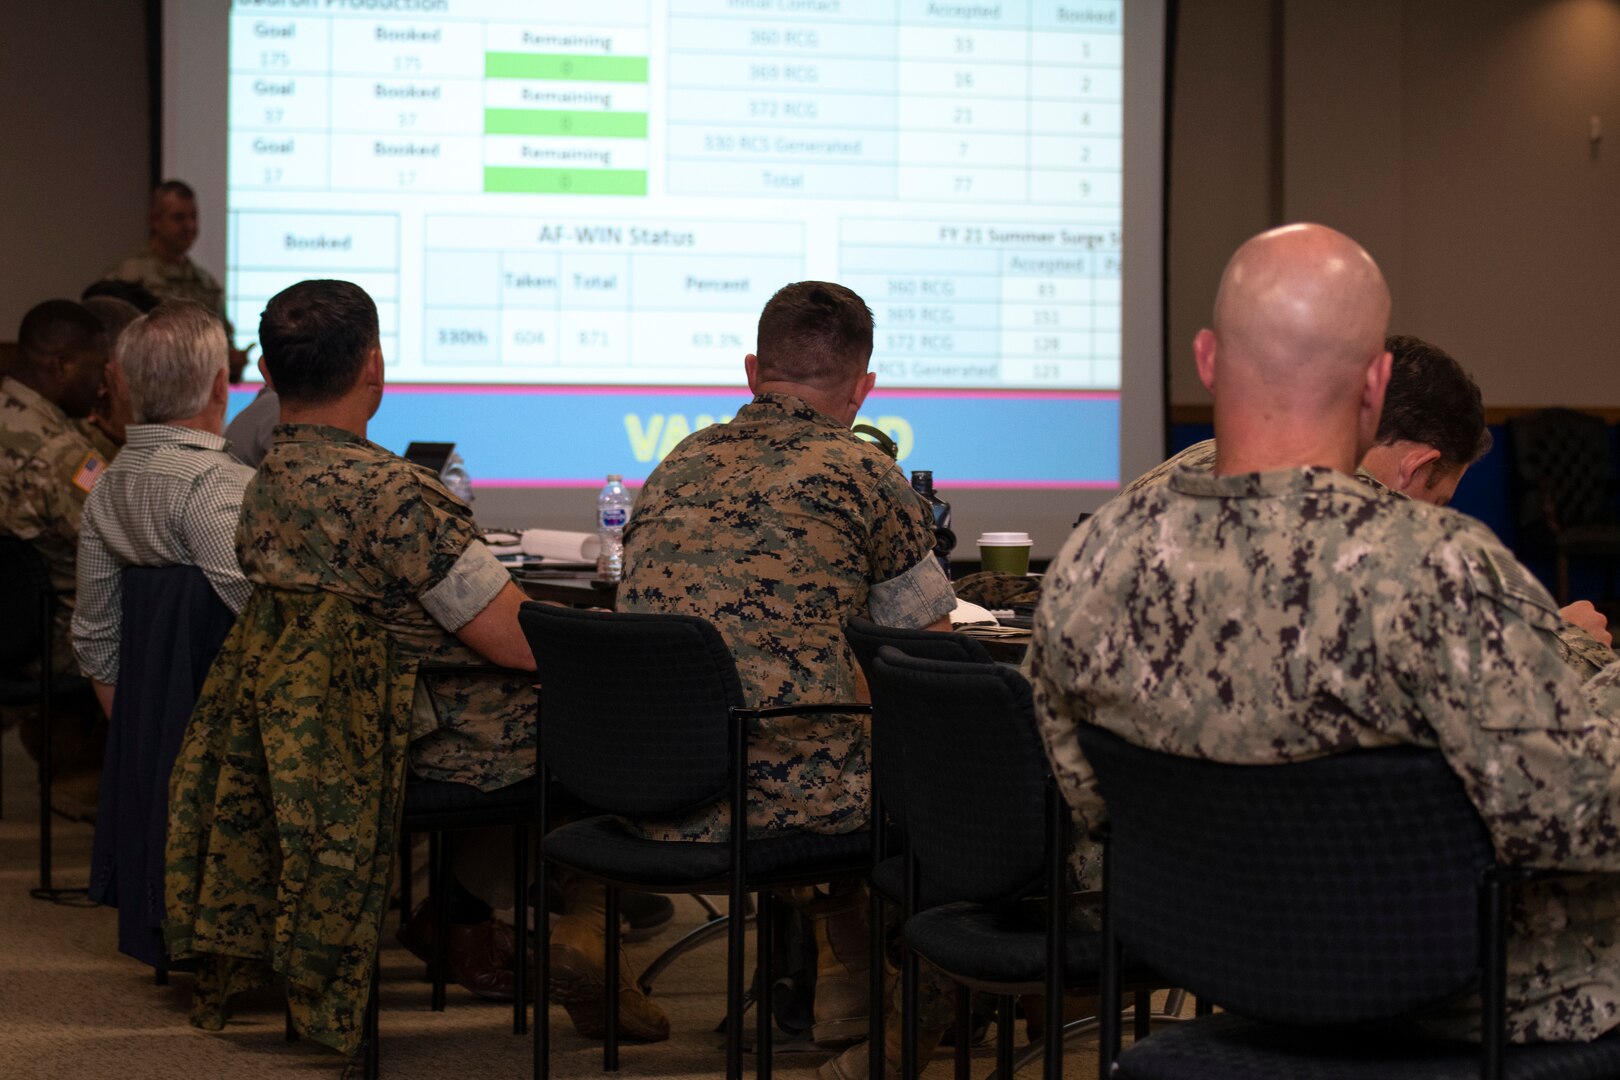 Members from various service components listen on during a briefing at the 2021 Special Operations Forces Training "Shura" hosted by the Special Warfare Training Wing.